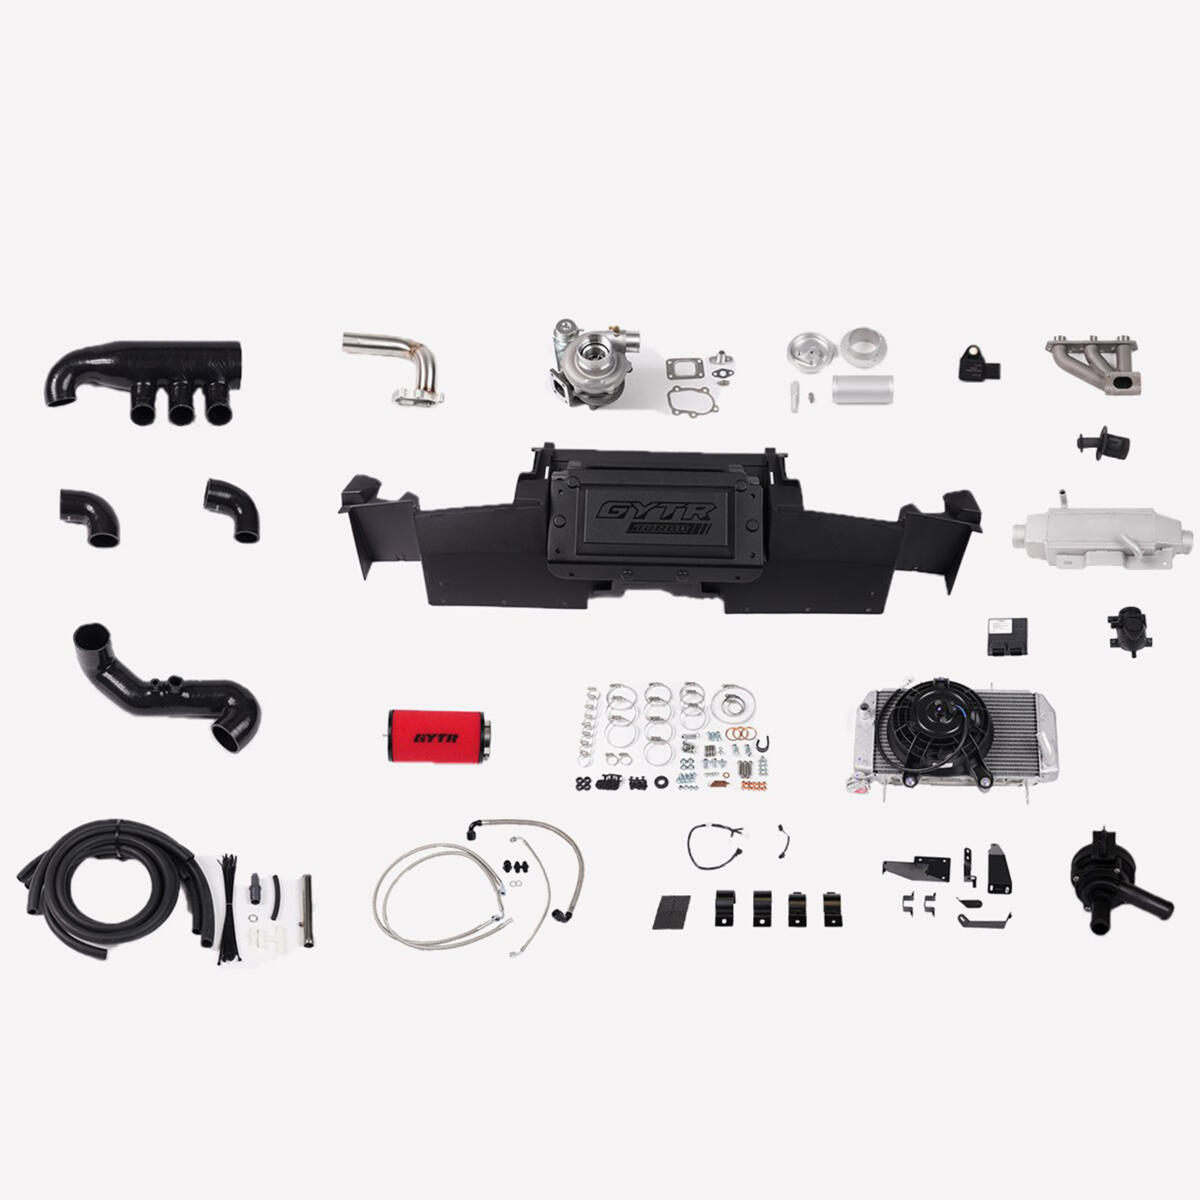 This kit is designed for the no limits driver that wants to pull more power from their YXZ. We scoured the globe, sourcing the highest quality components available – determined to build a turbo kit unlike any other. During development, no detail was overlooked. You'll immediately feel the power as soon as you hit the gas..